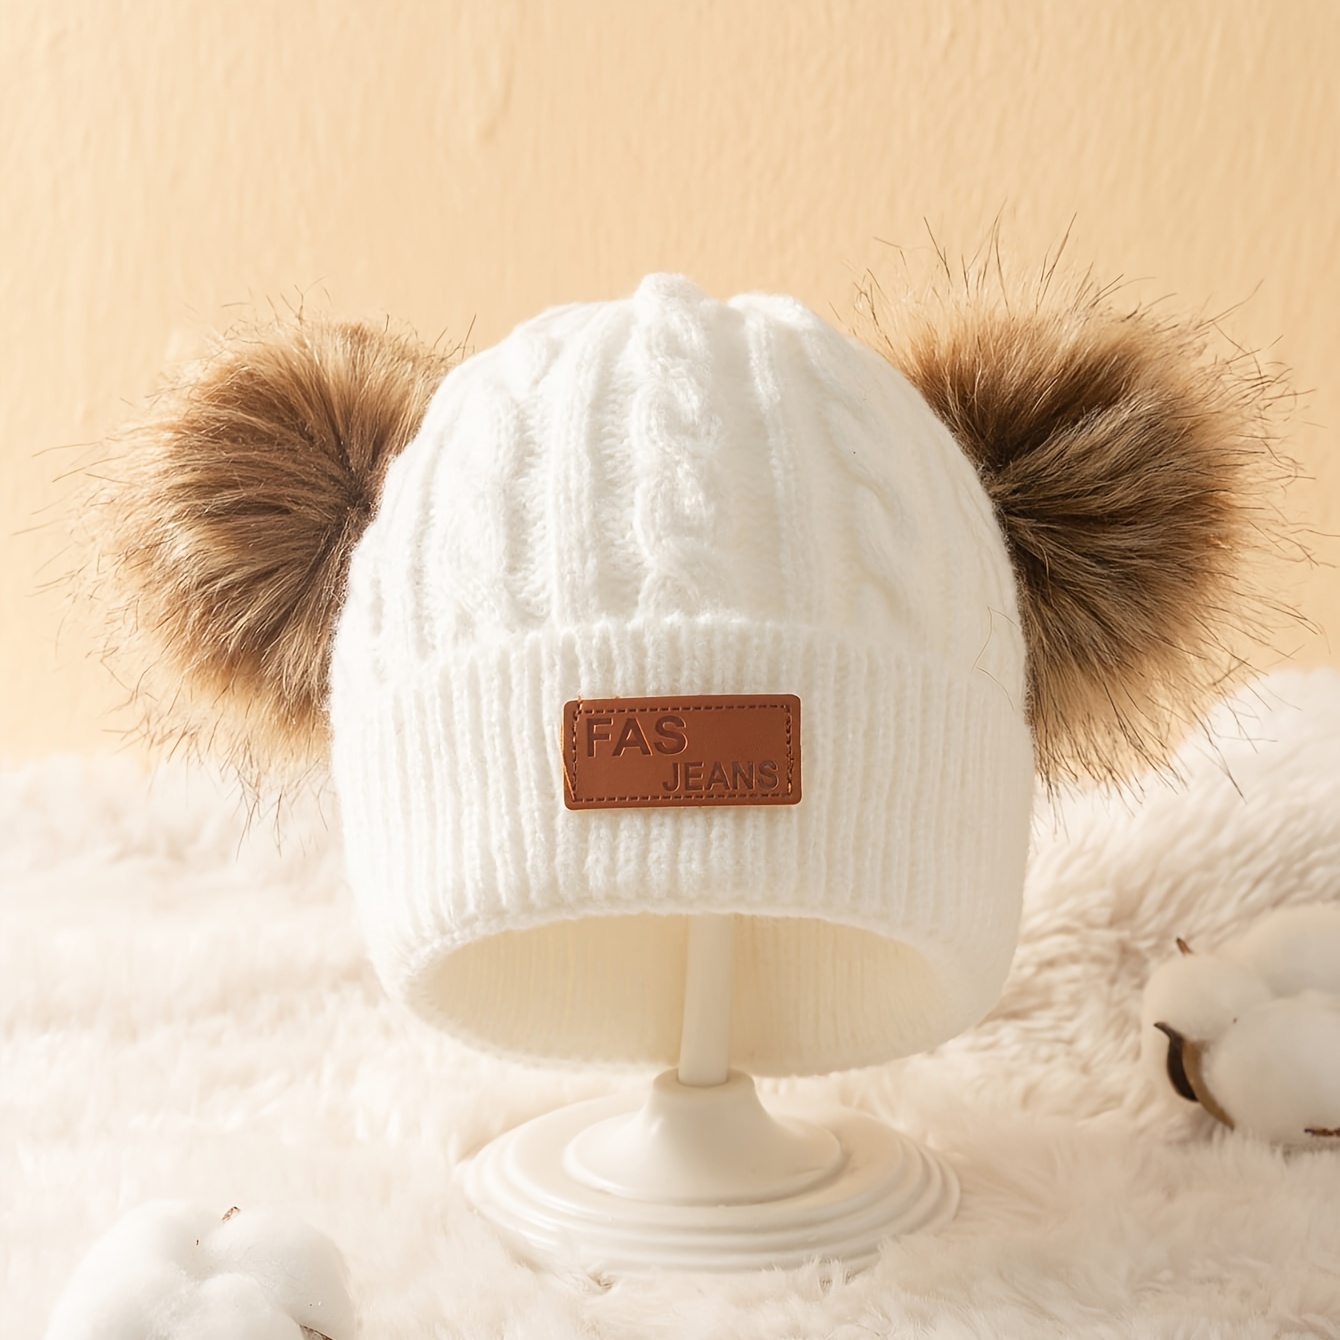 1pc White Knitted Beanie Hat With Pom-pom Ball For Kids, Winter